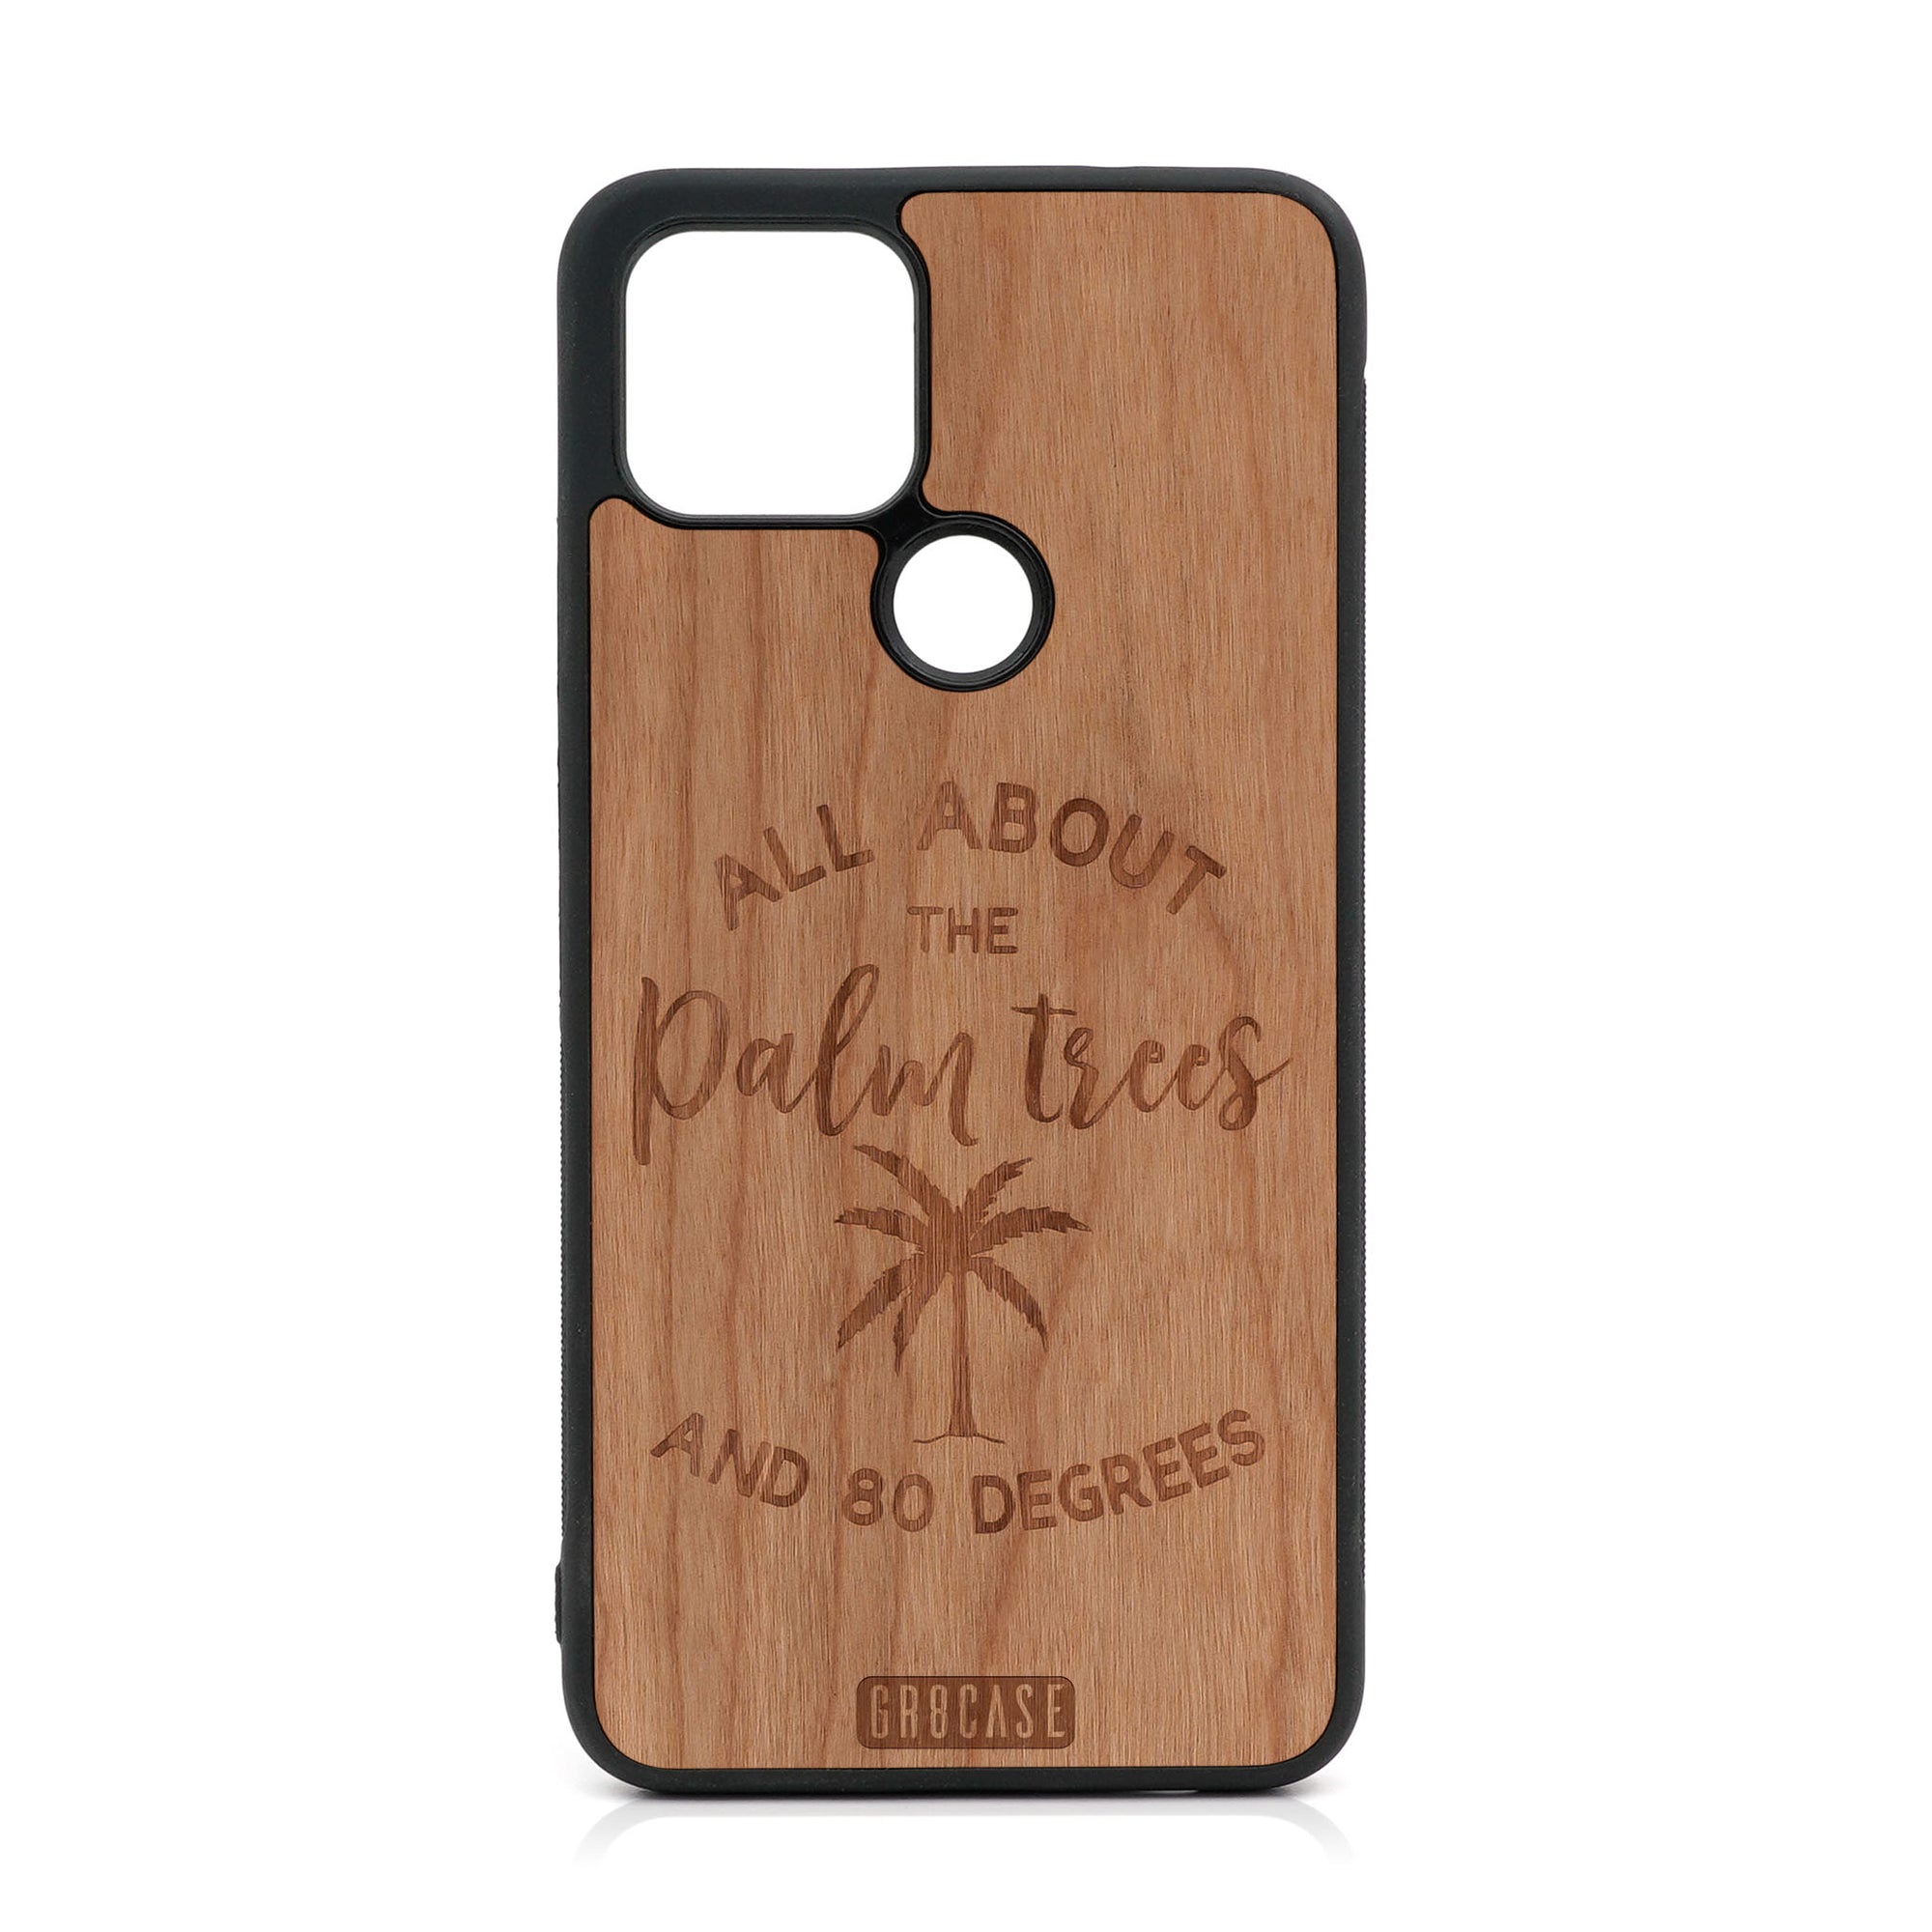 All About The Palm Trees and 80 Degrees Design Wood Case For Google Pixel 5